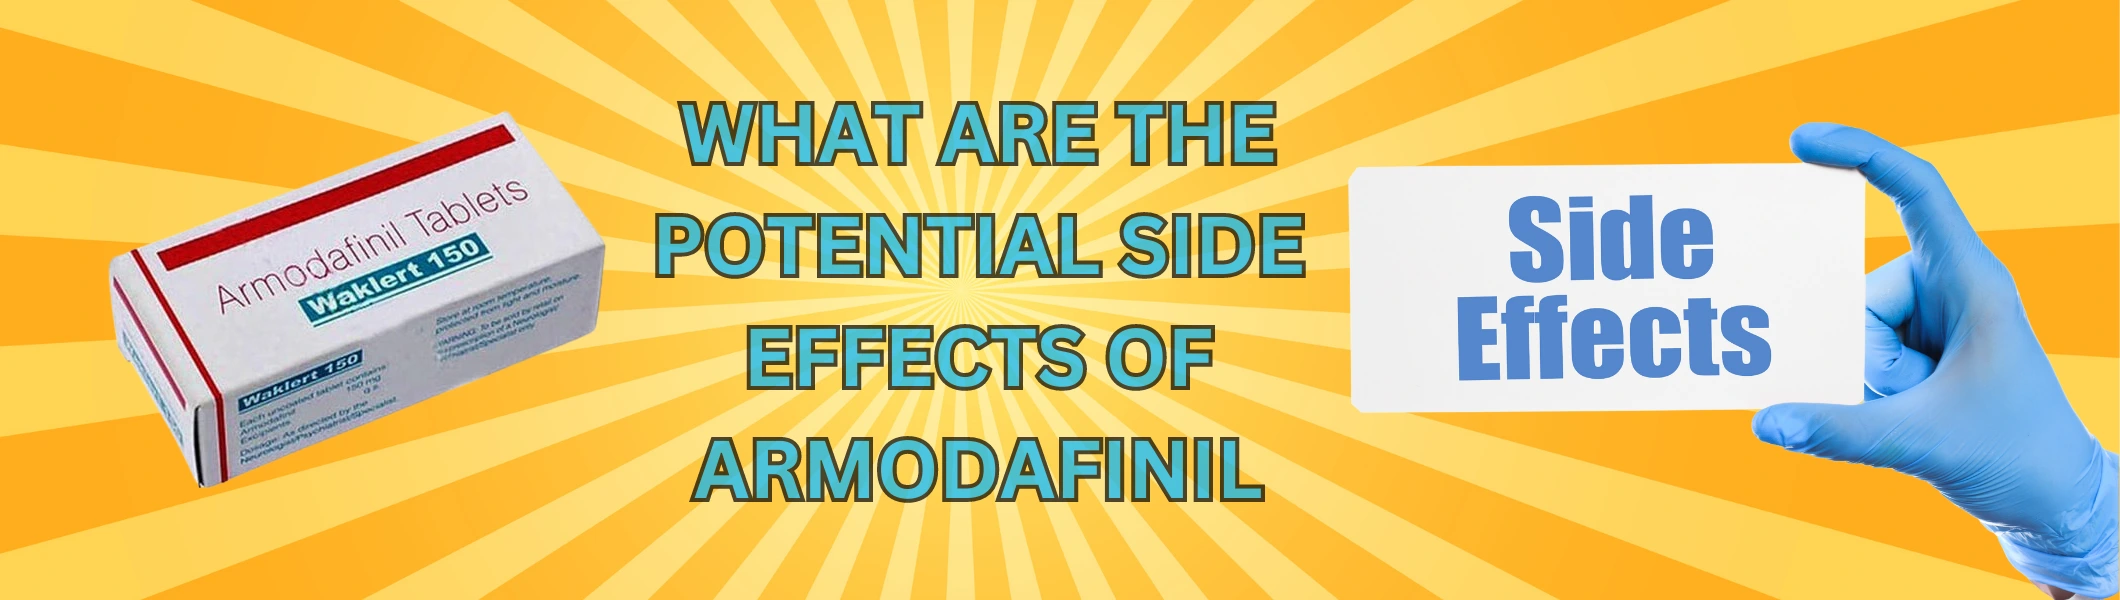 side-effects-of-armodafinil